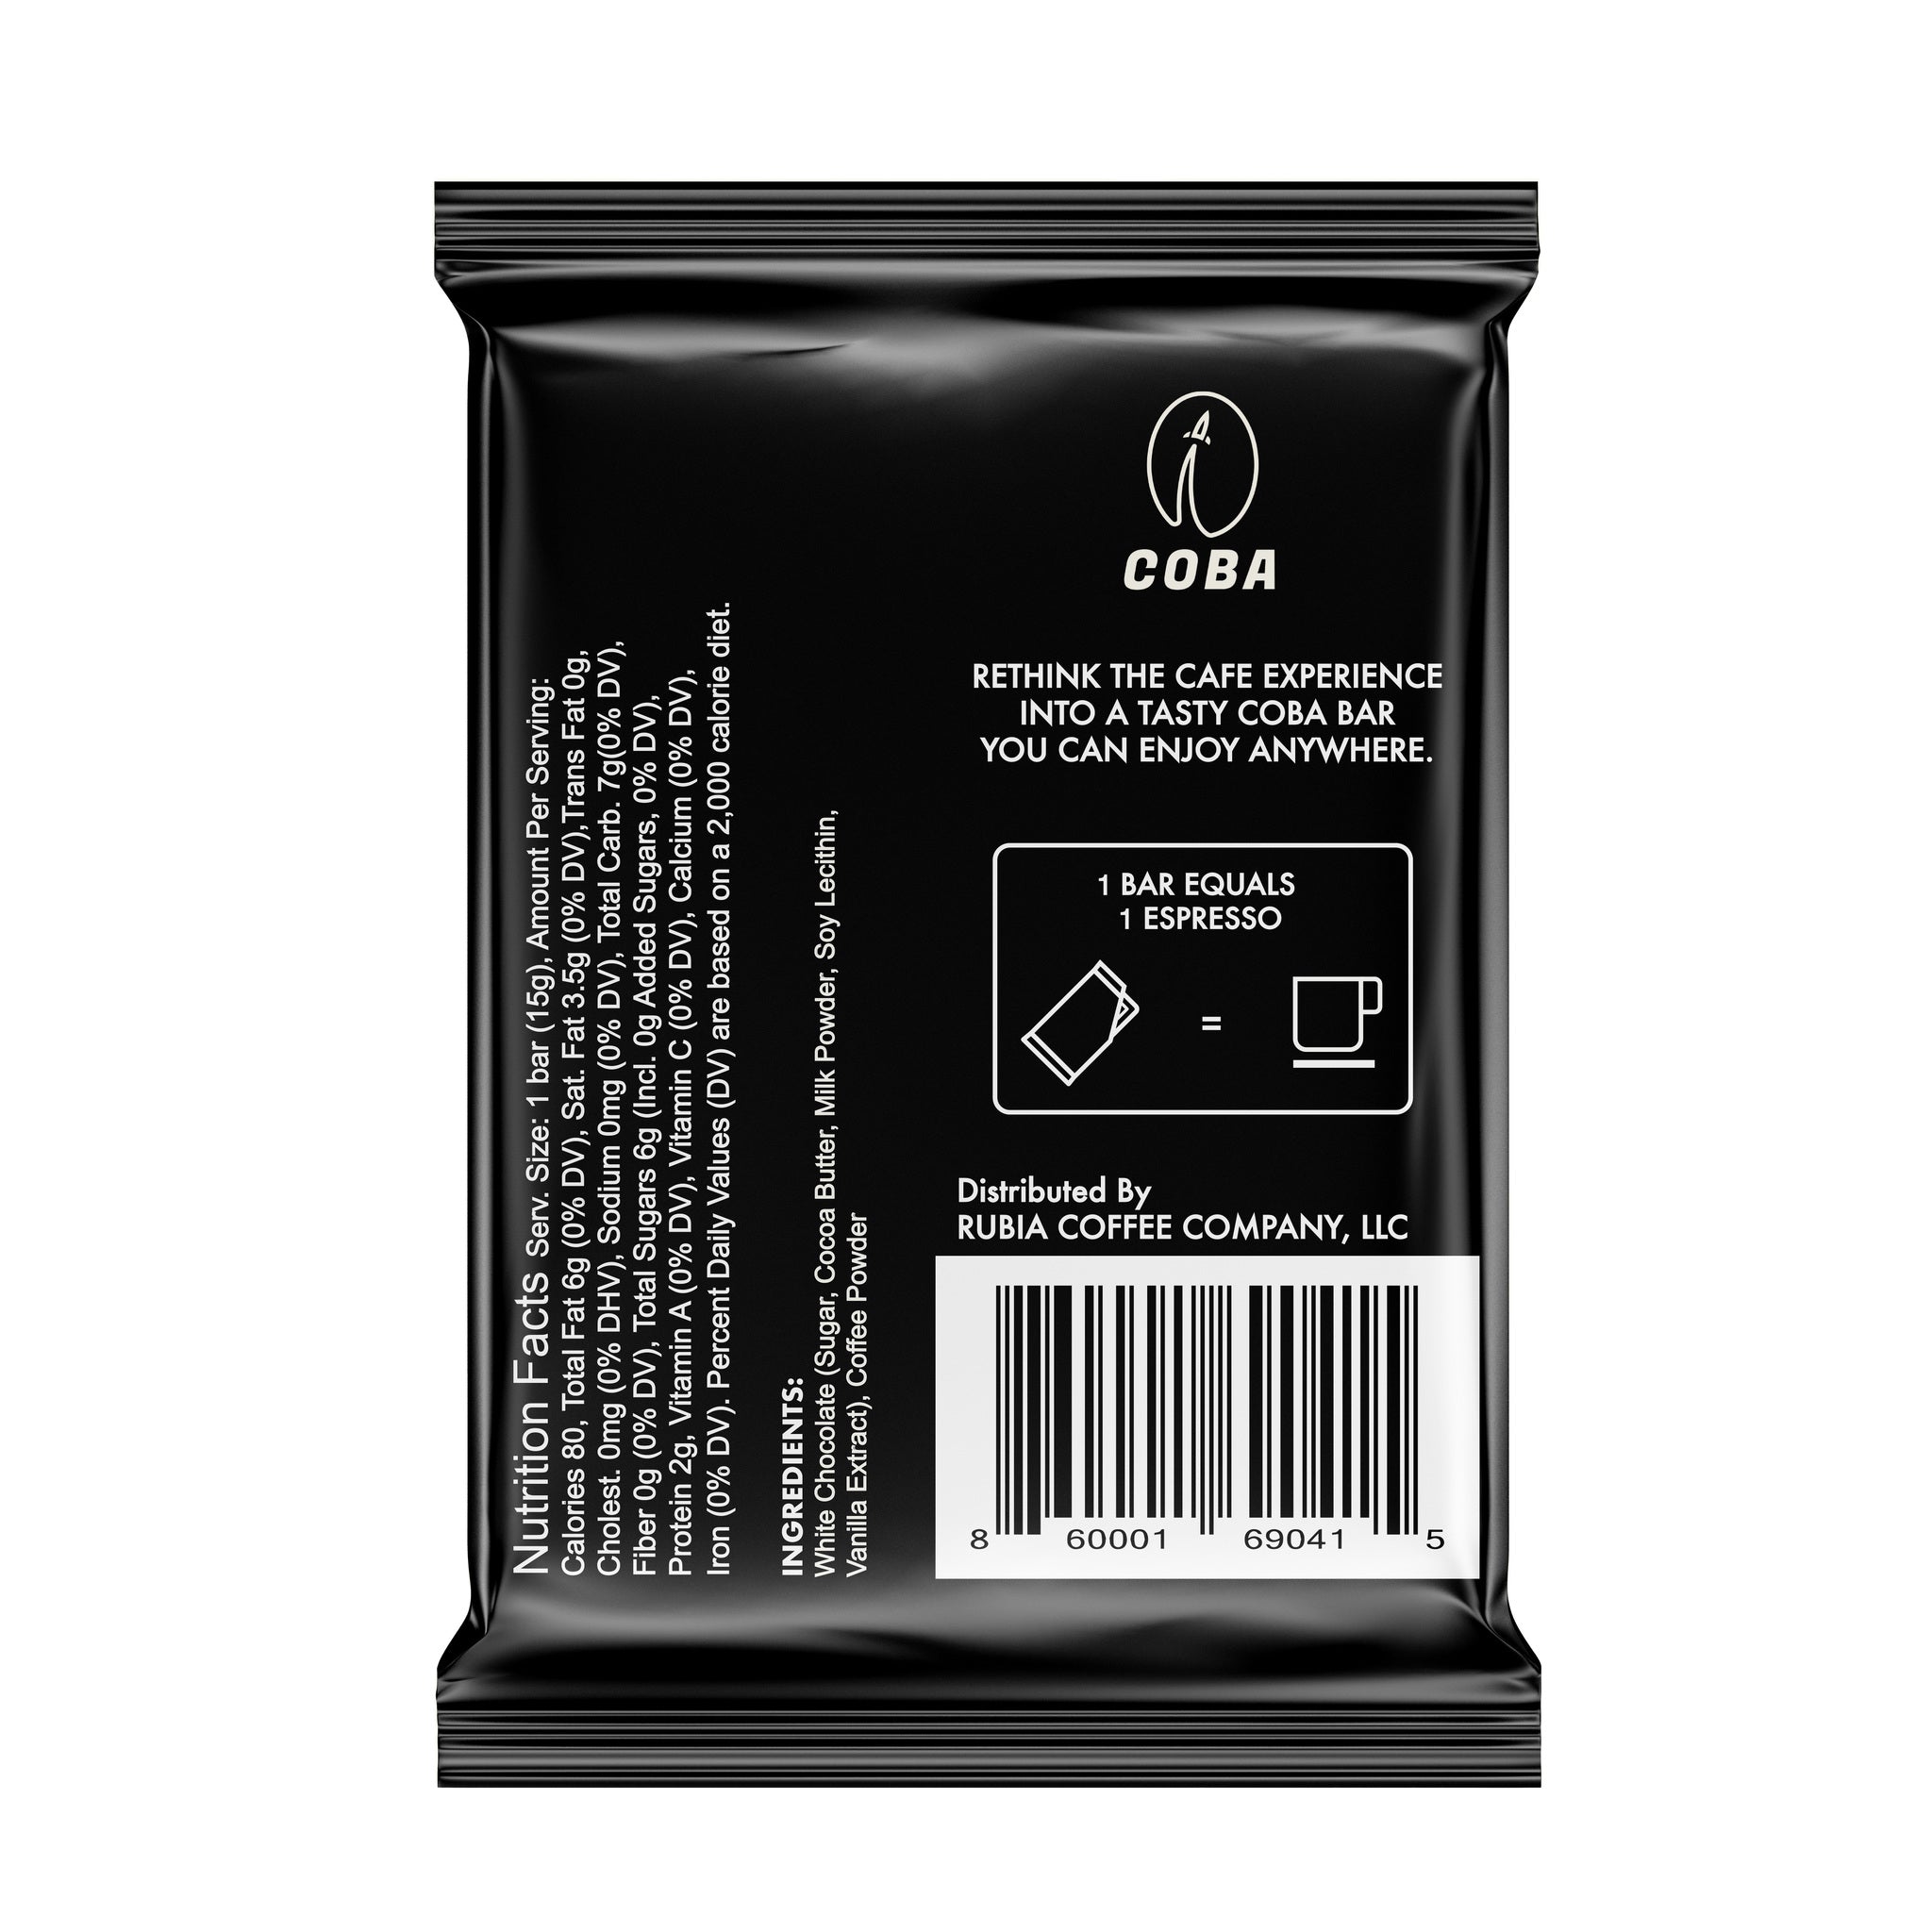 Try All COBA Bars - 4 Bars for $4 (Limit One per Customer)